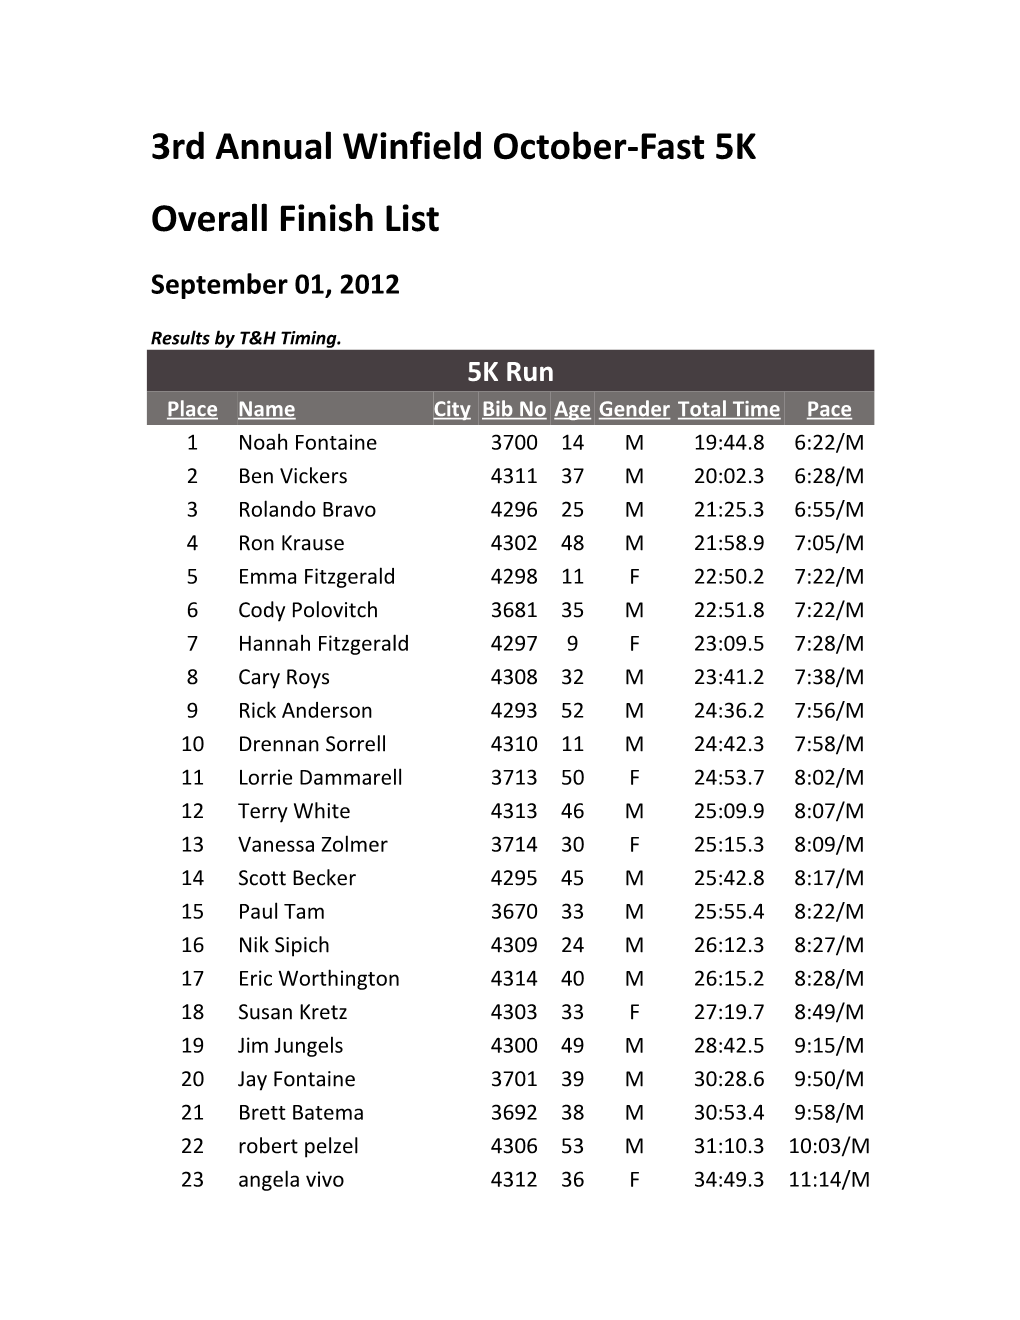 3Rd Annual Winfield October-Fast 5K